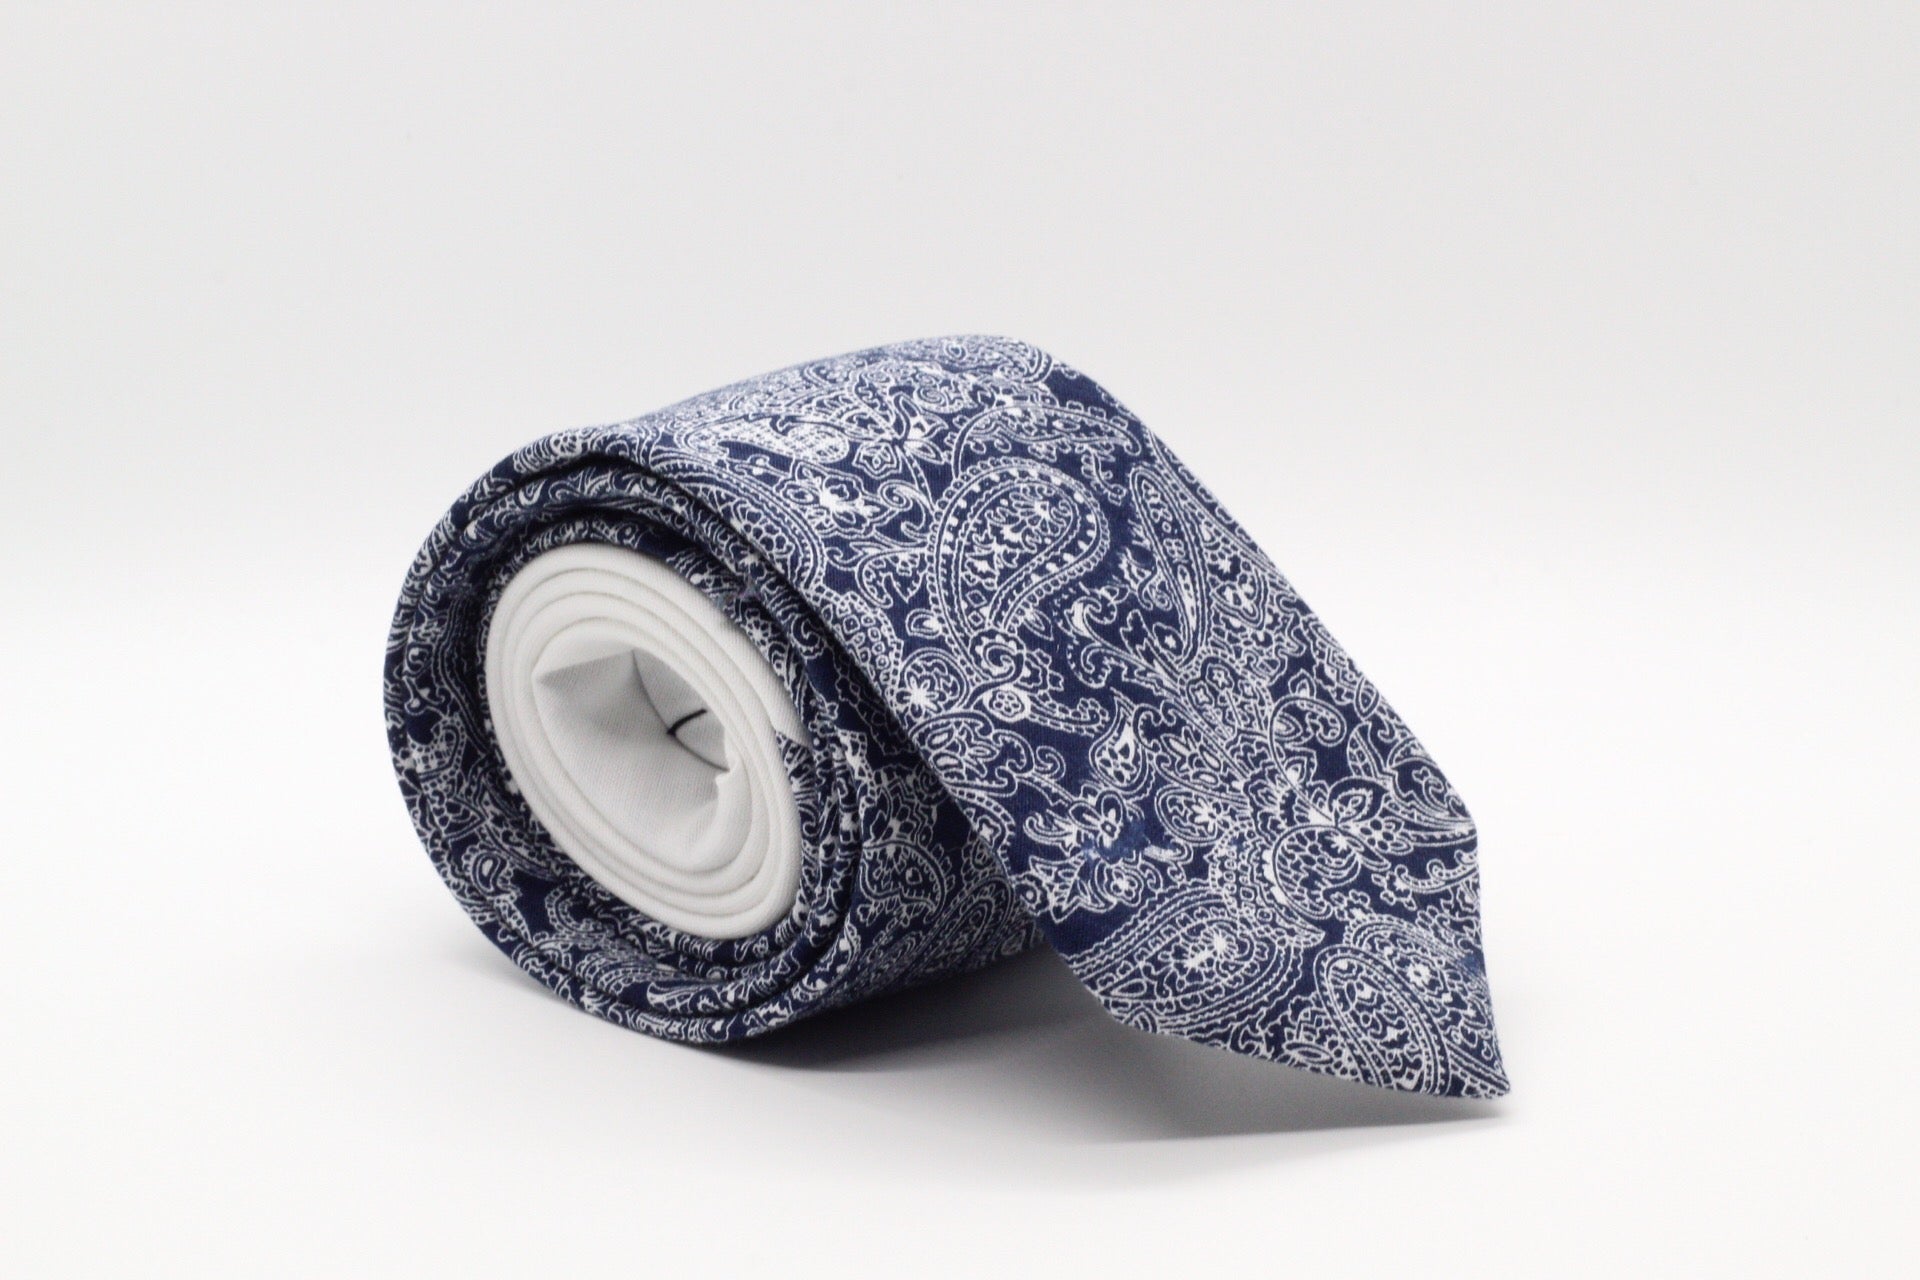 The Rodgers Paisley Tie